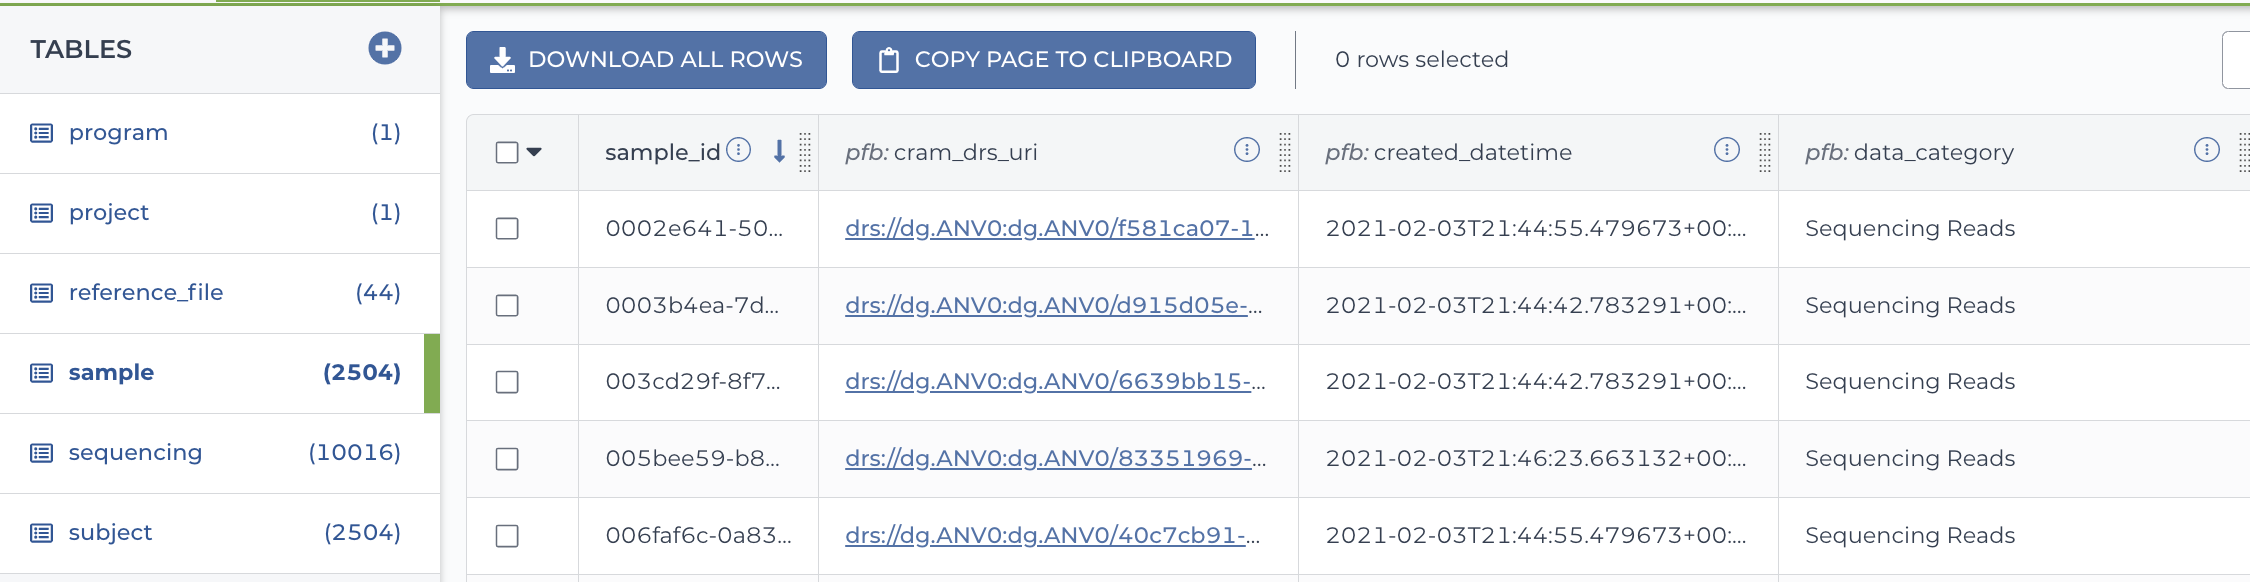 Screenshot of sample table with the column header pfb:cram_drs_uri in the second column containing links to the input data